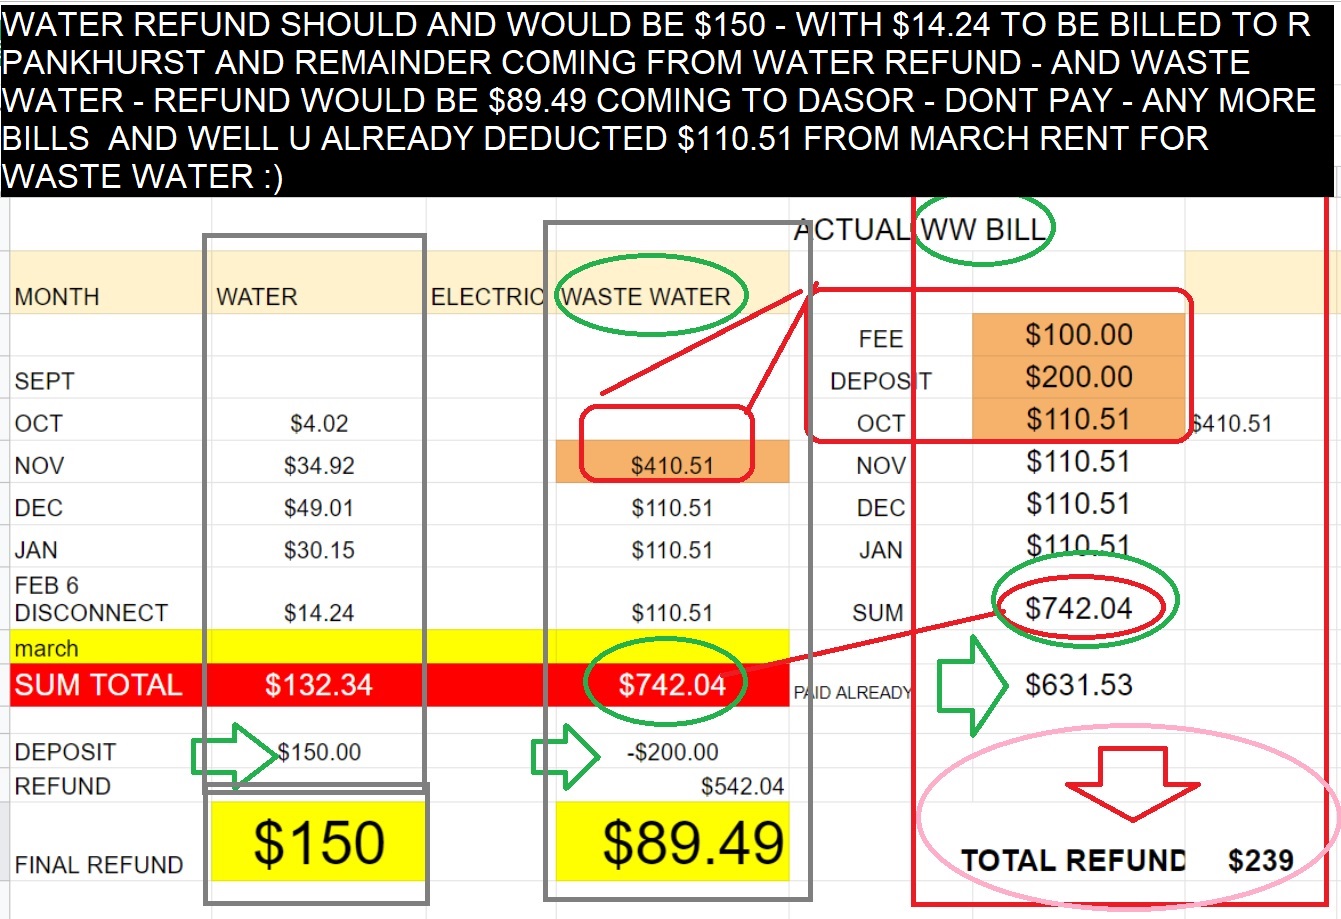 WATER REFUND SHOULD AND WOULD BE #150 - WITH $14.24 TO BE BILLED TO R PANKHURST AND REMAINDER COMING FROM WATER REFUND - AND WASTE WASTER - REFUND WOULD BE $89.49 COMING TO DASOR - DONT PAY - ANY MORE BILLS -